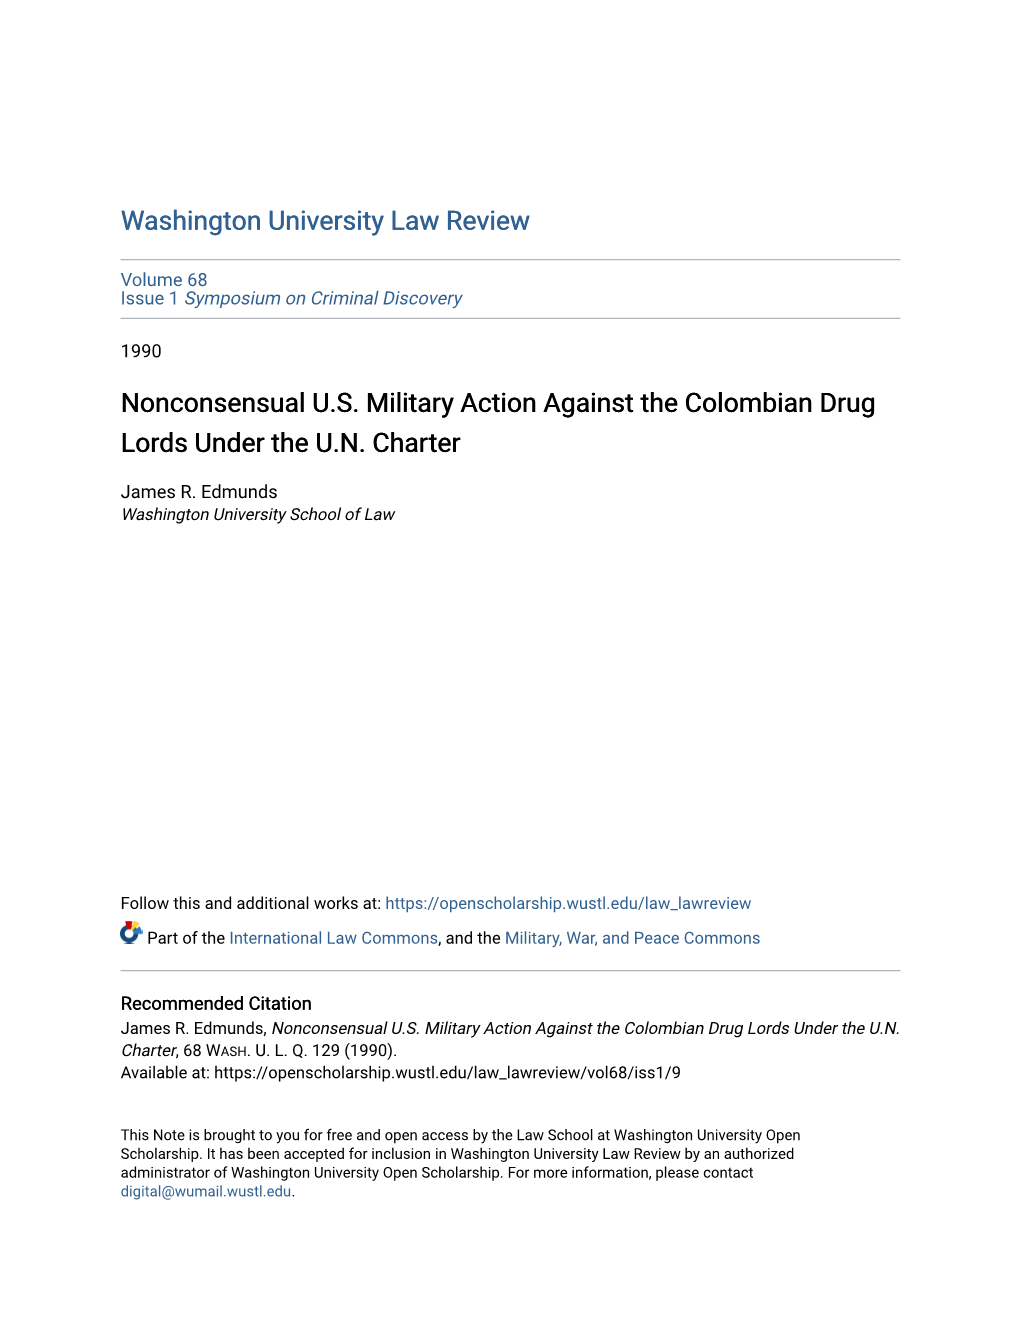 Nonconsensual U.S. Military Action Against the Colombian Drug Lords Under the U.N